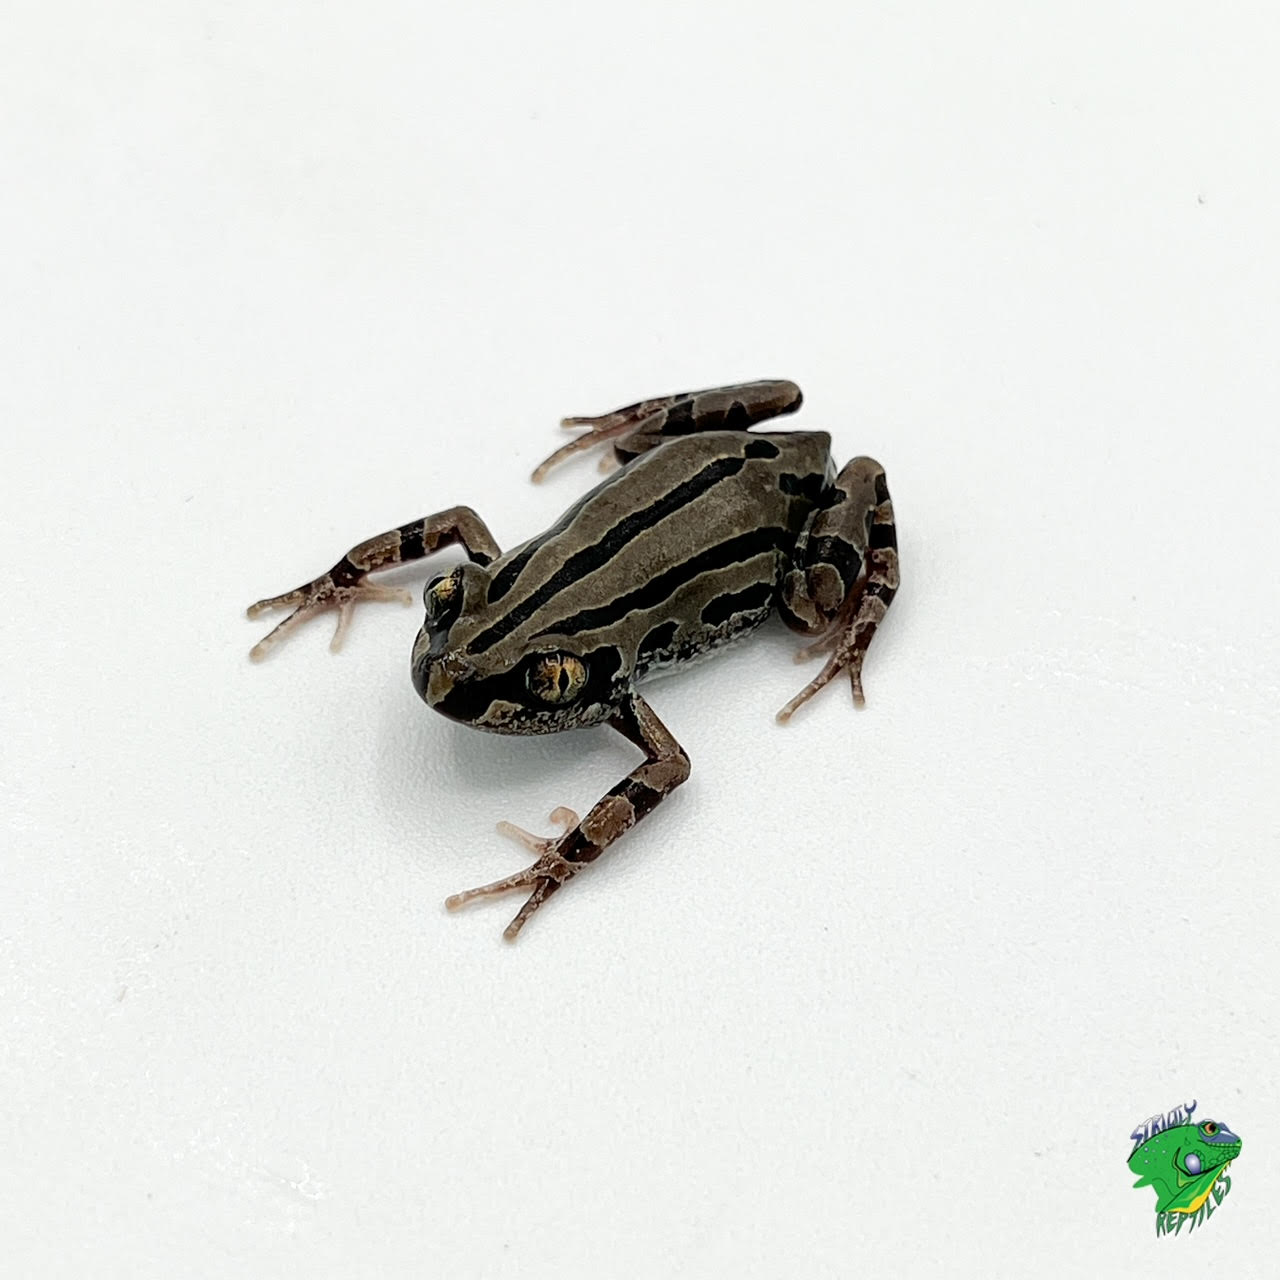 Green & Black Walking Frog - adult - Strictly Reptiles Inc.